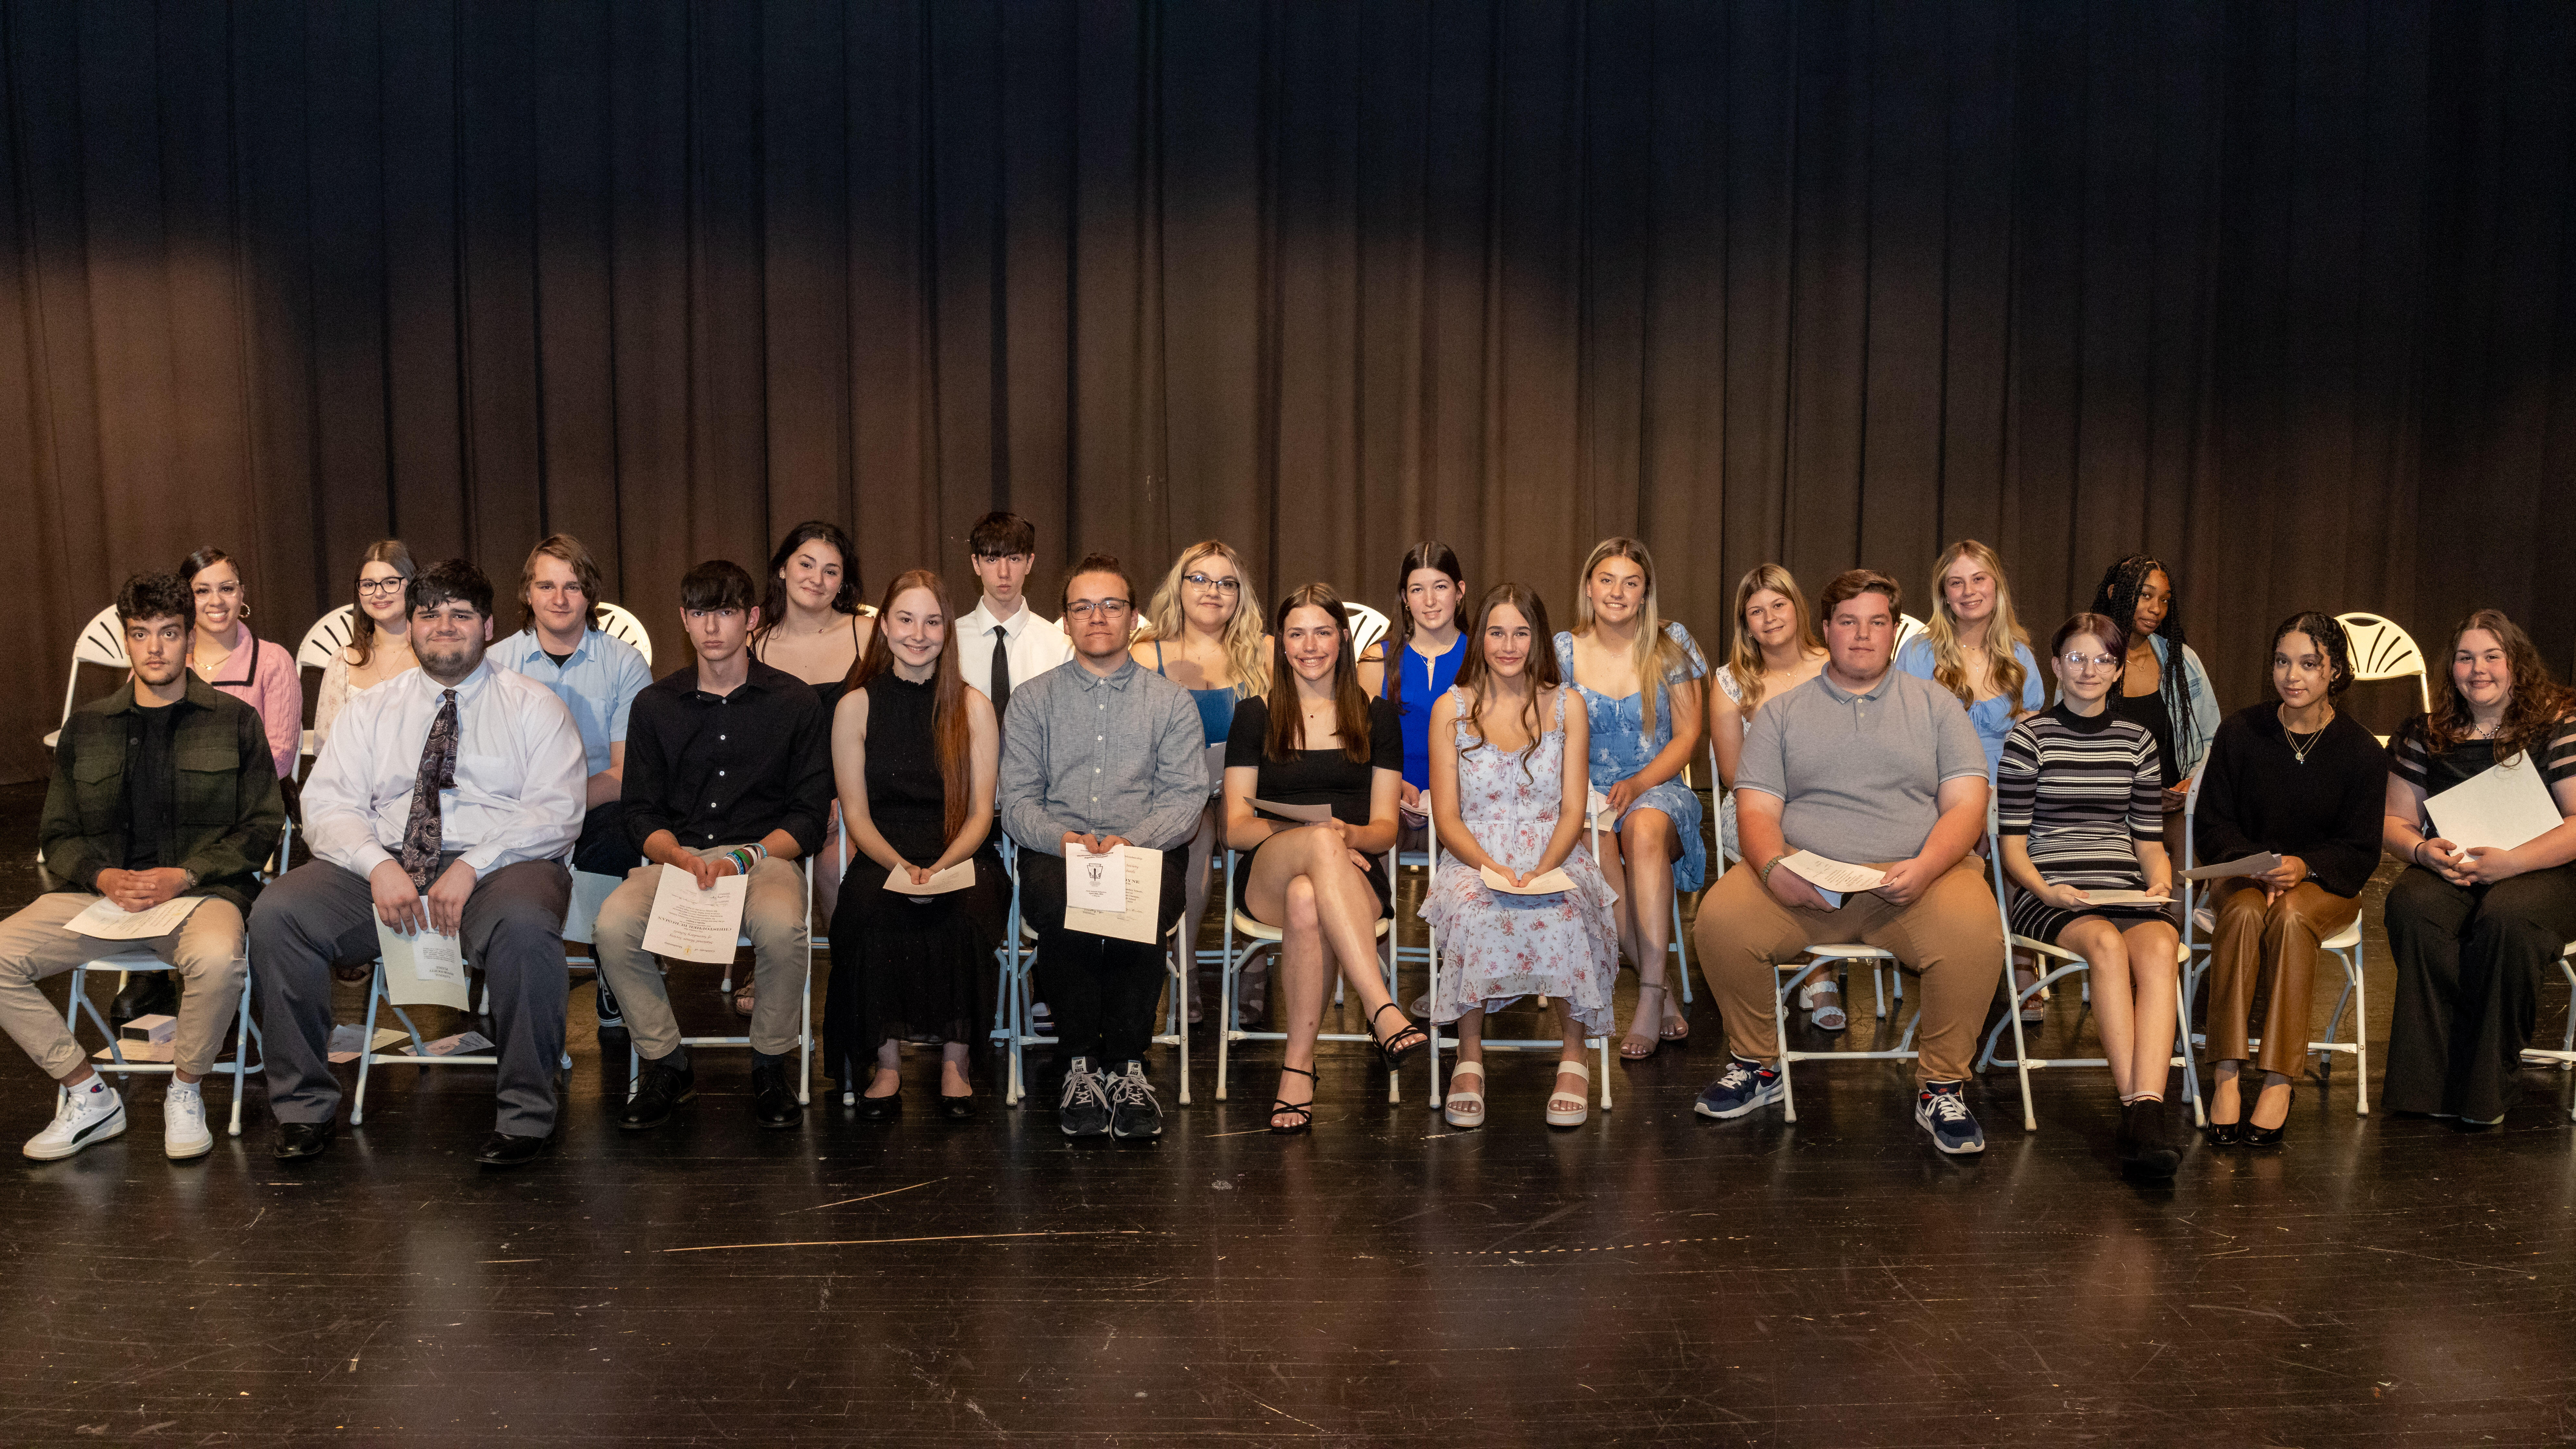 The new inductees into the Steel Valley National Honor Society